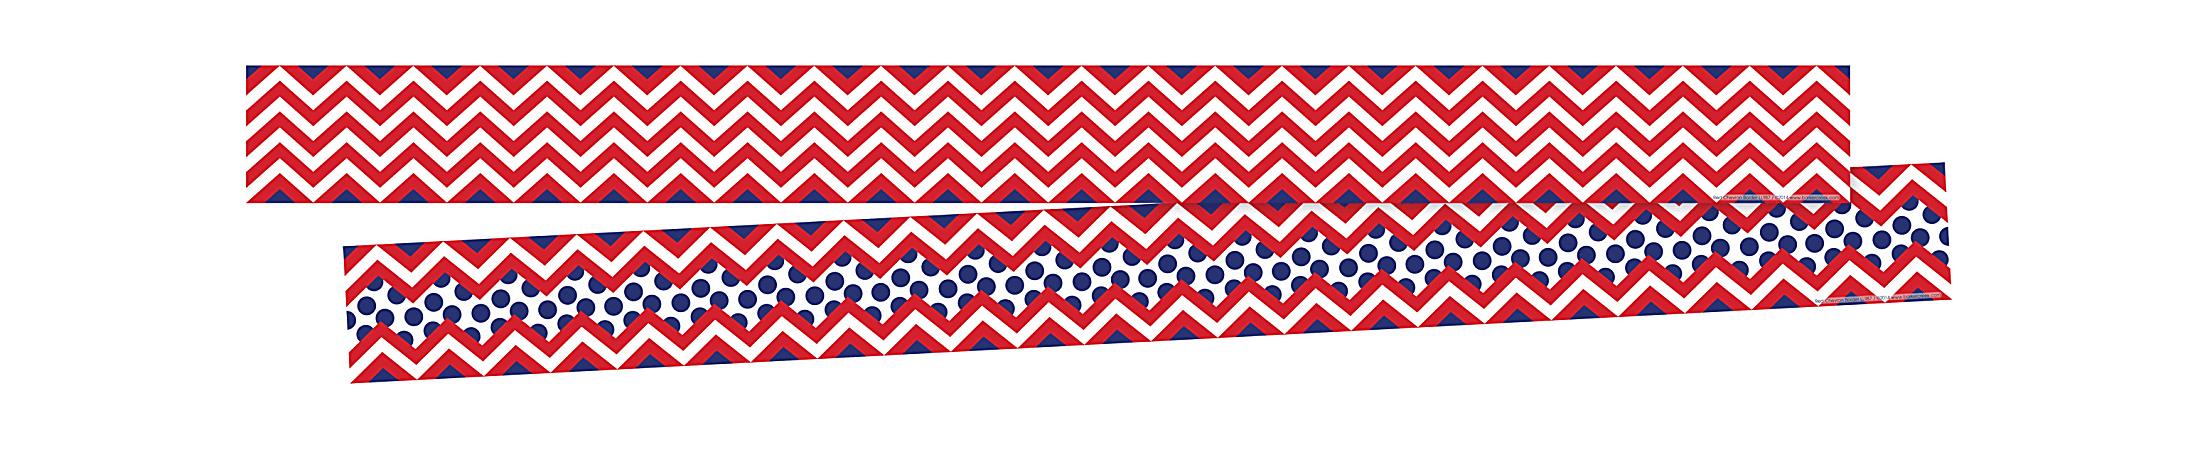 Barker Creek Double-Sided Border Strips, 3" x 35", Chevron Red, Set Of 24